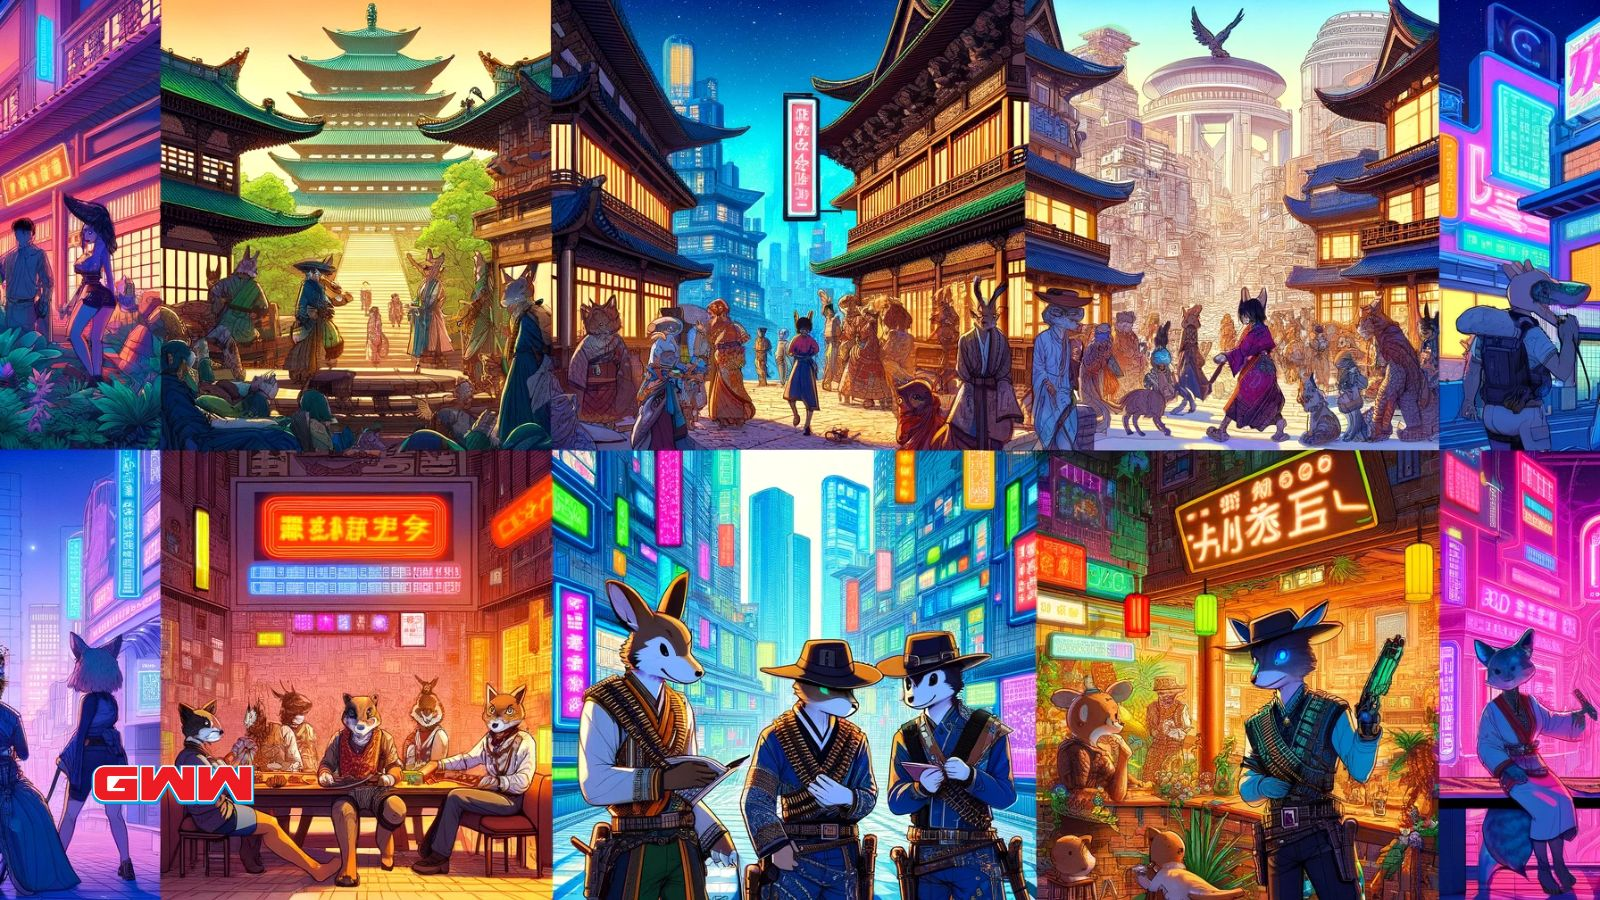 An anime-style illustration exploring cultural themes in a futuristic city inhabited by anthropomorphic animals.